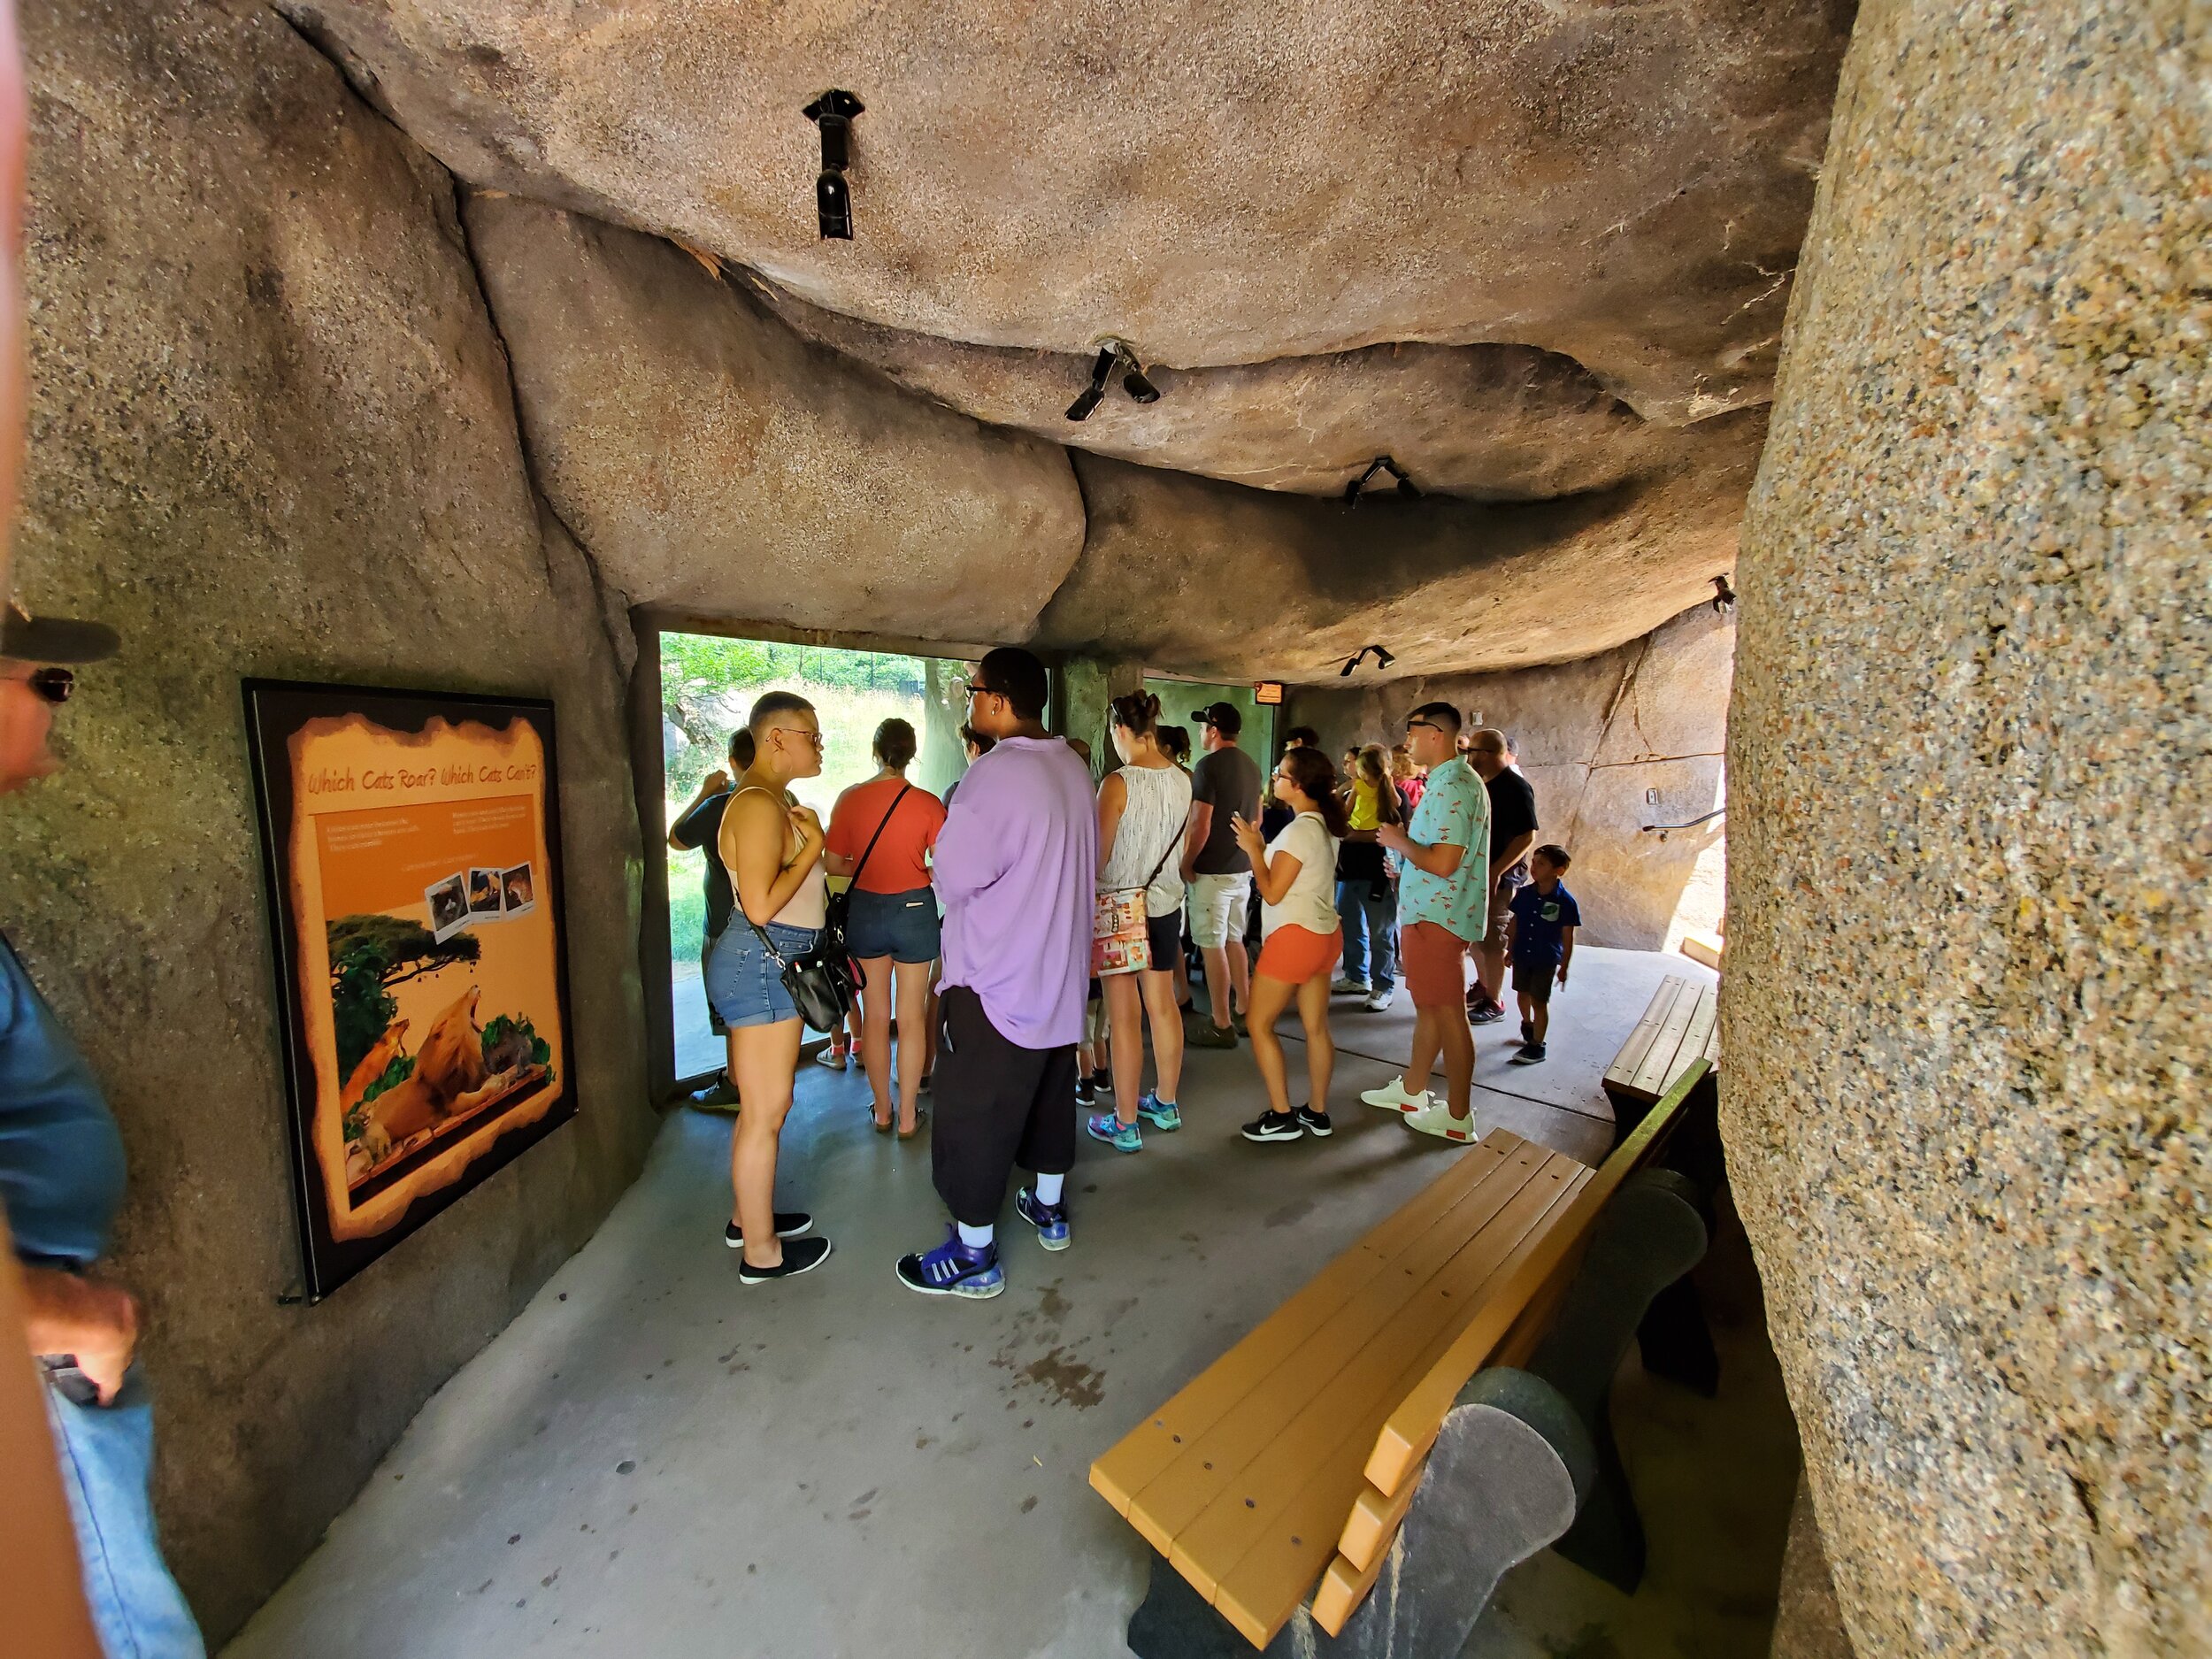  Viewing cave 